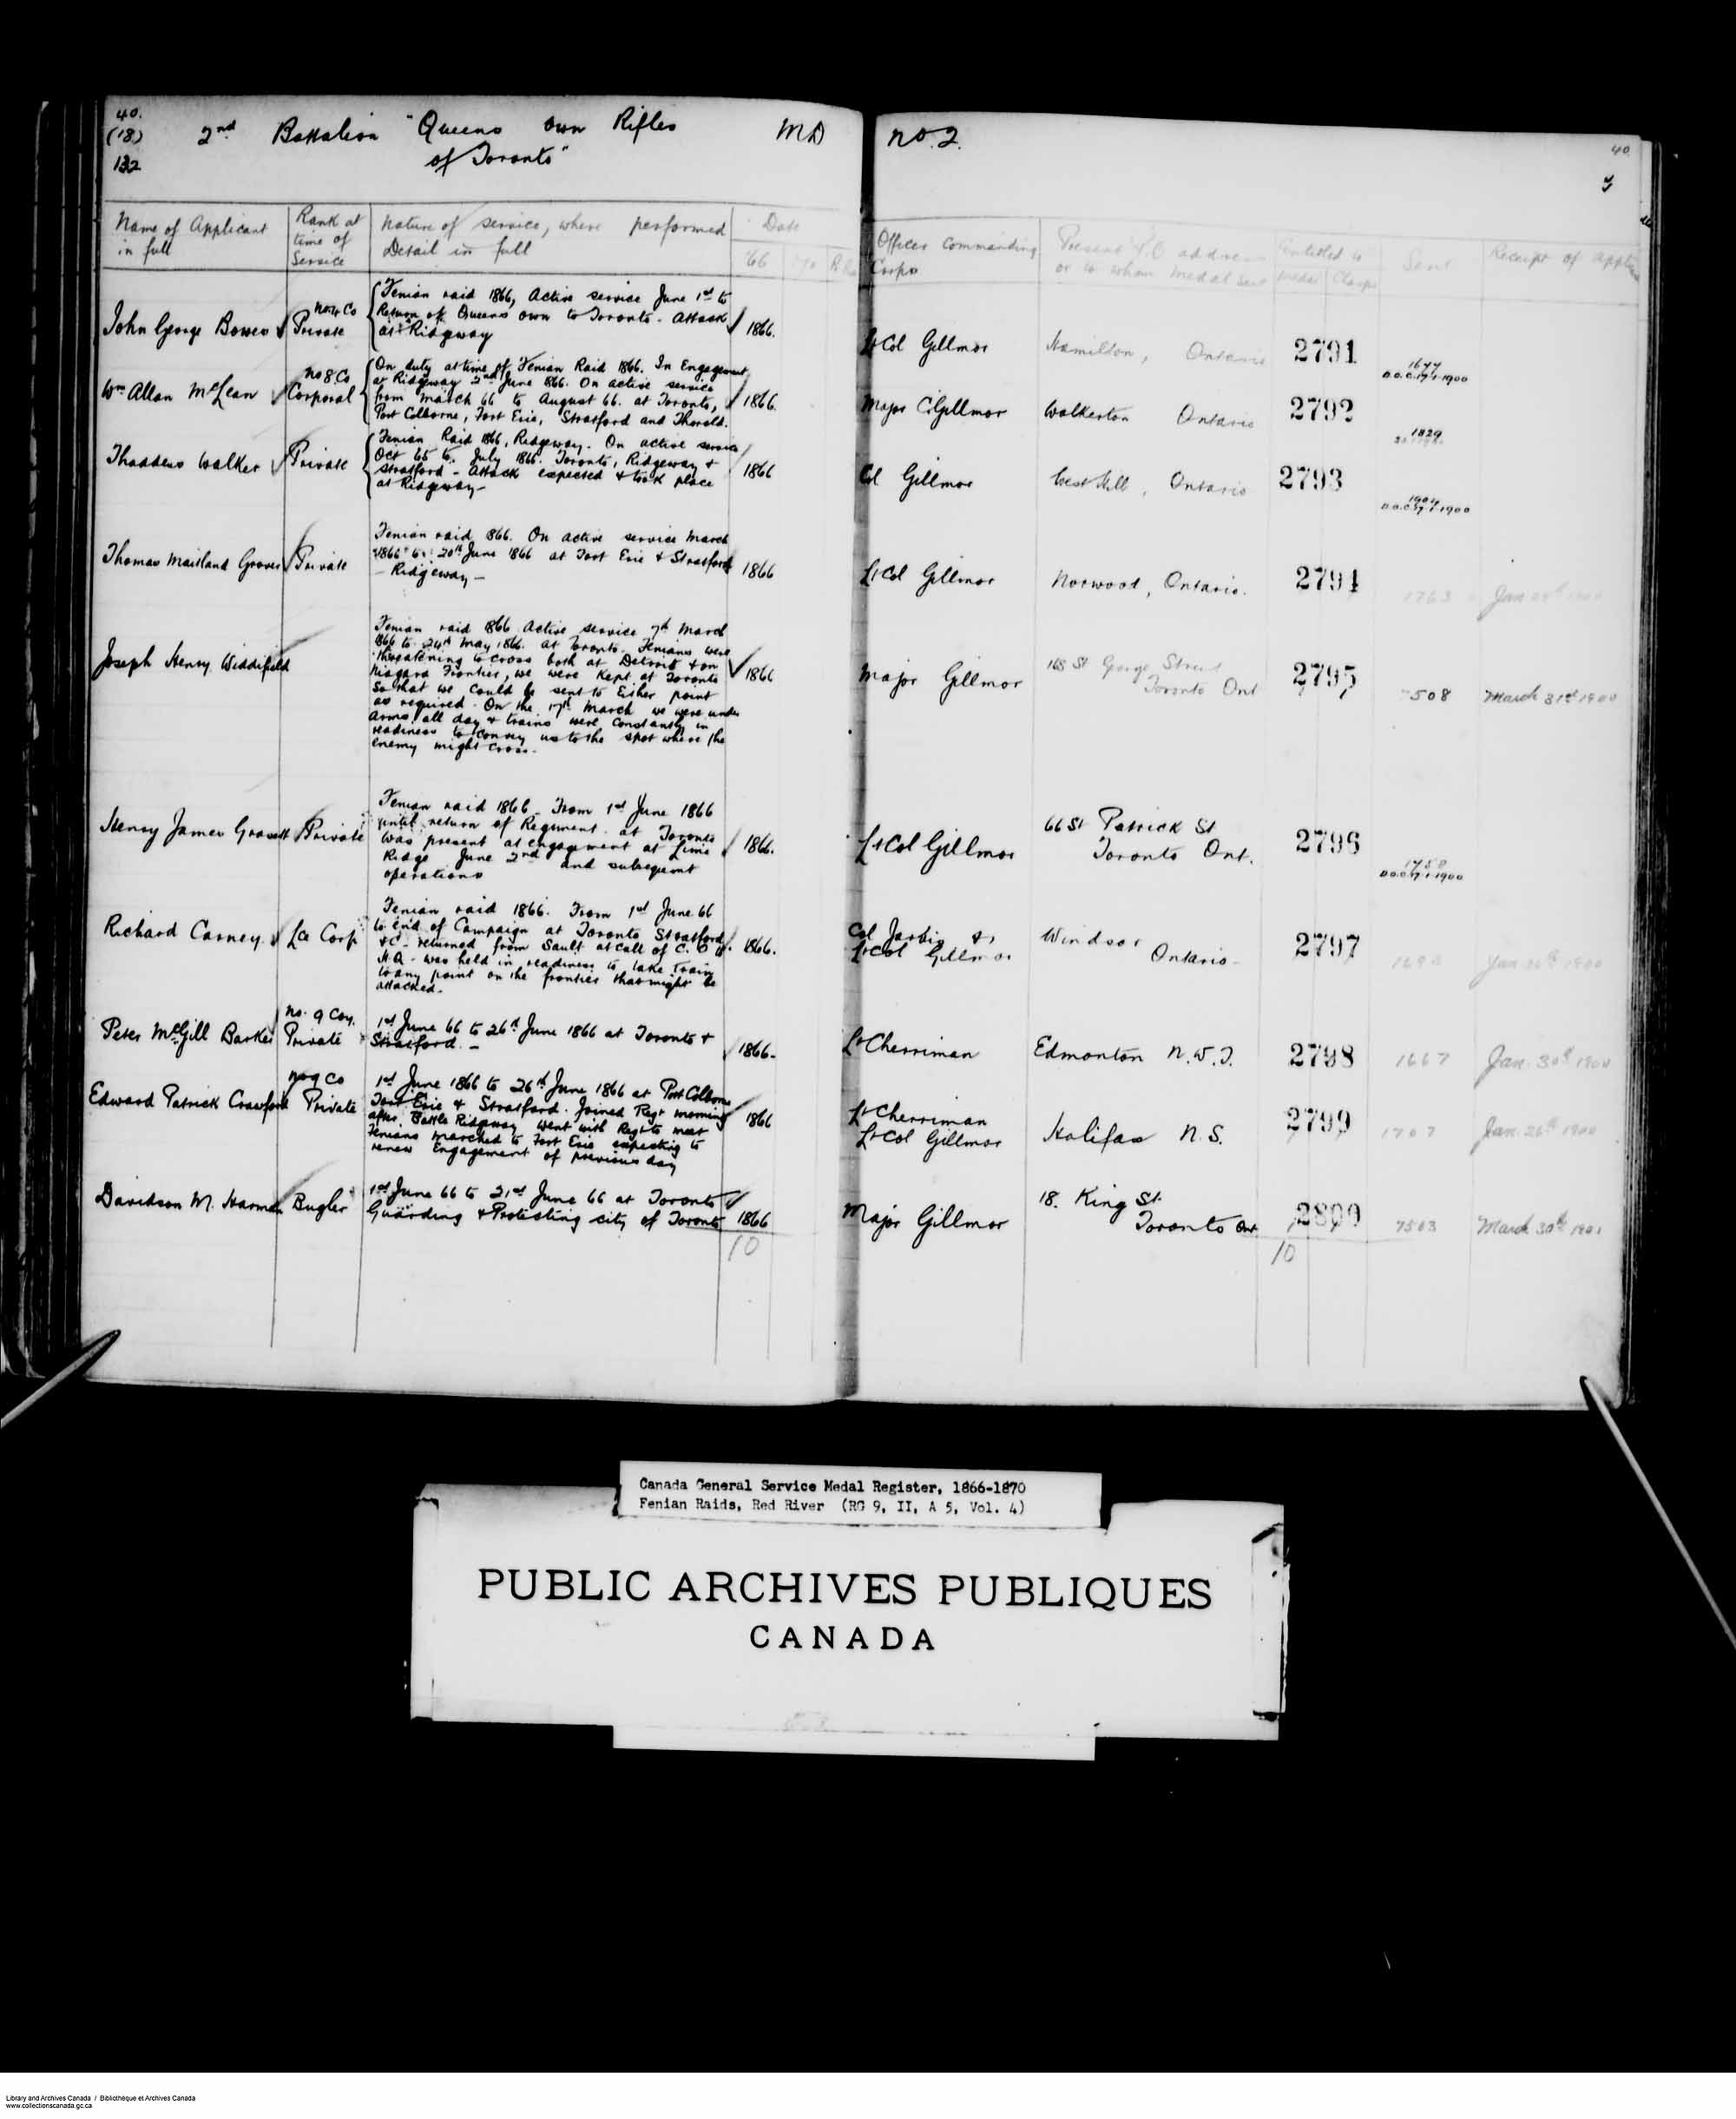 Digitized page of Medals, Honours and Awards for Image No.: e008681725